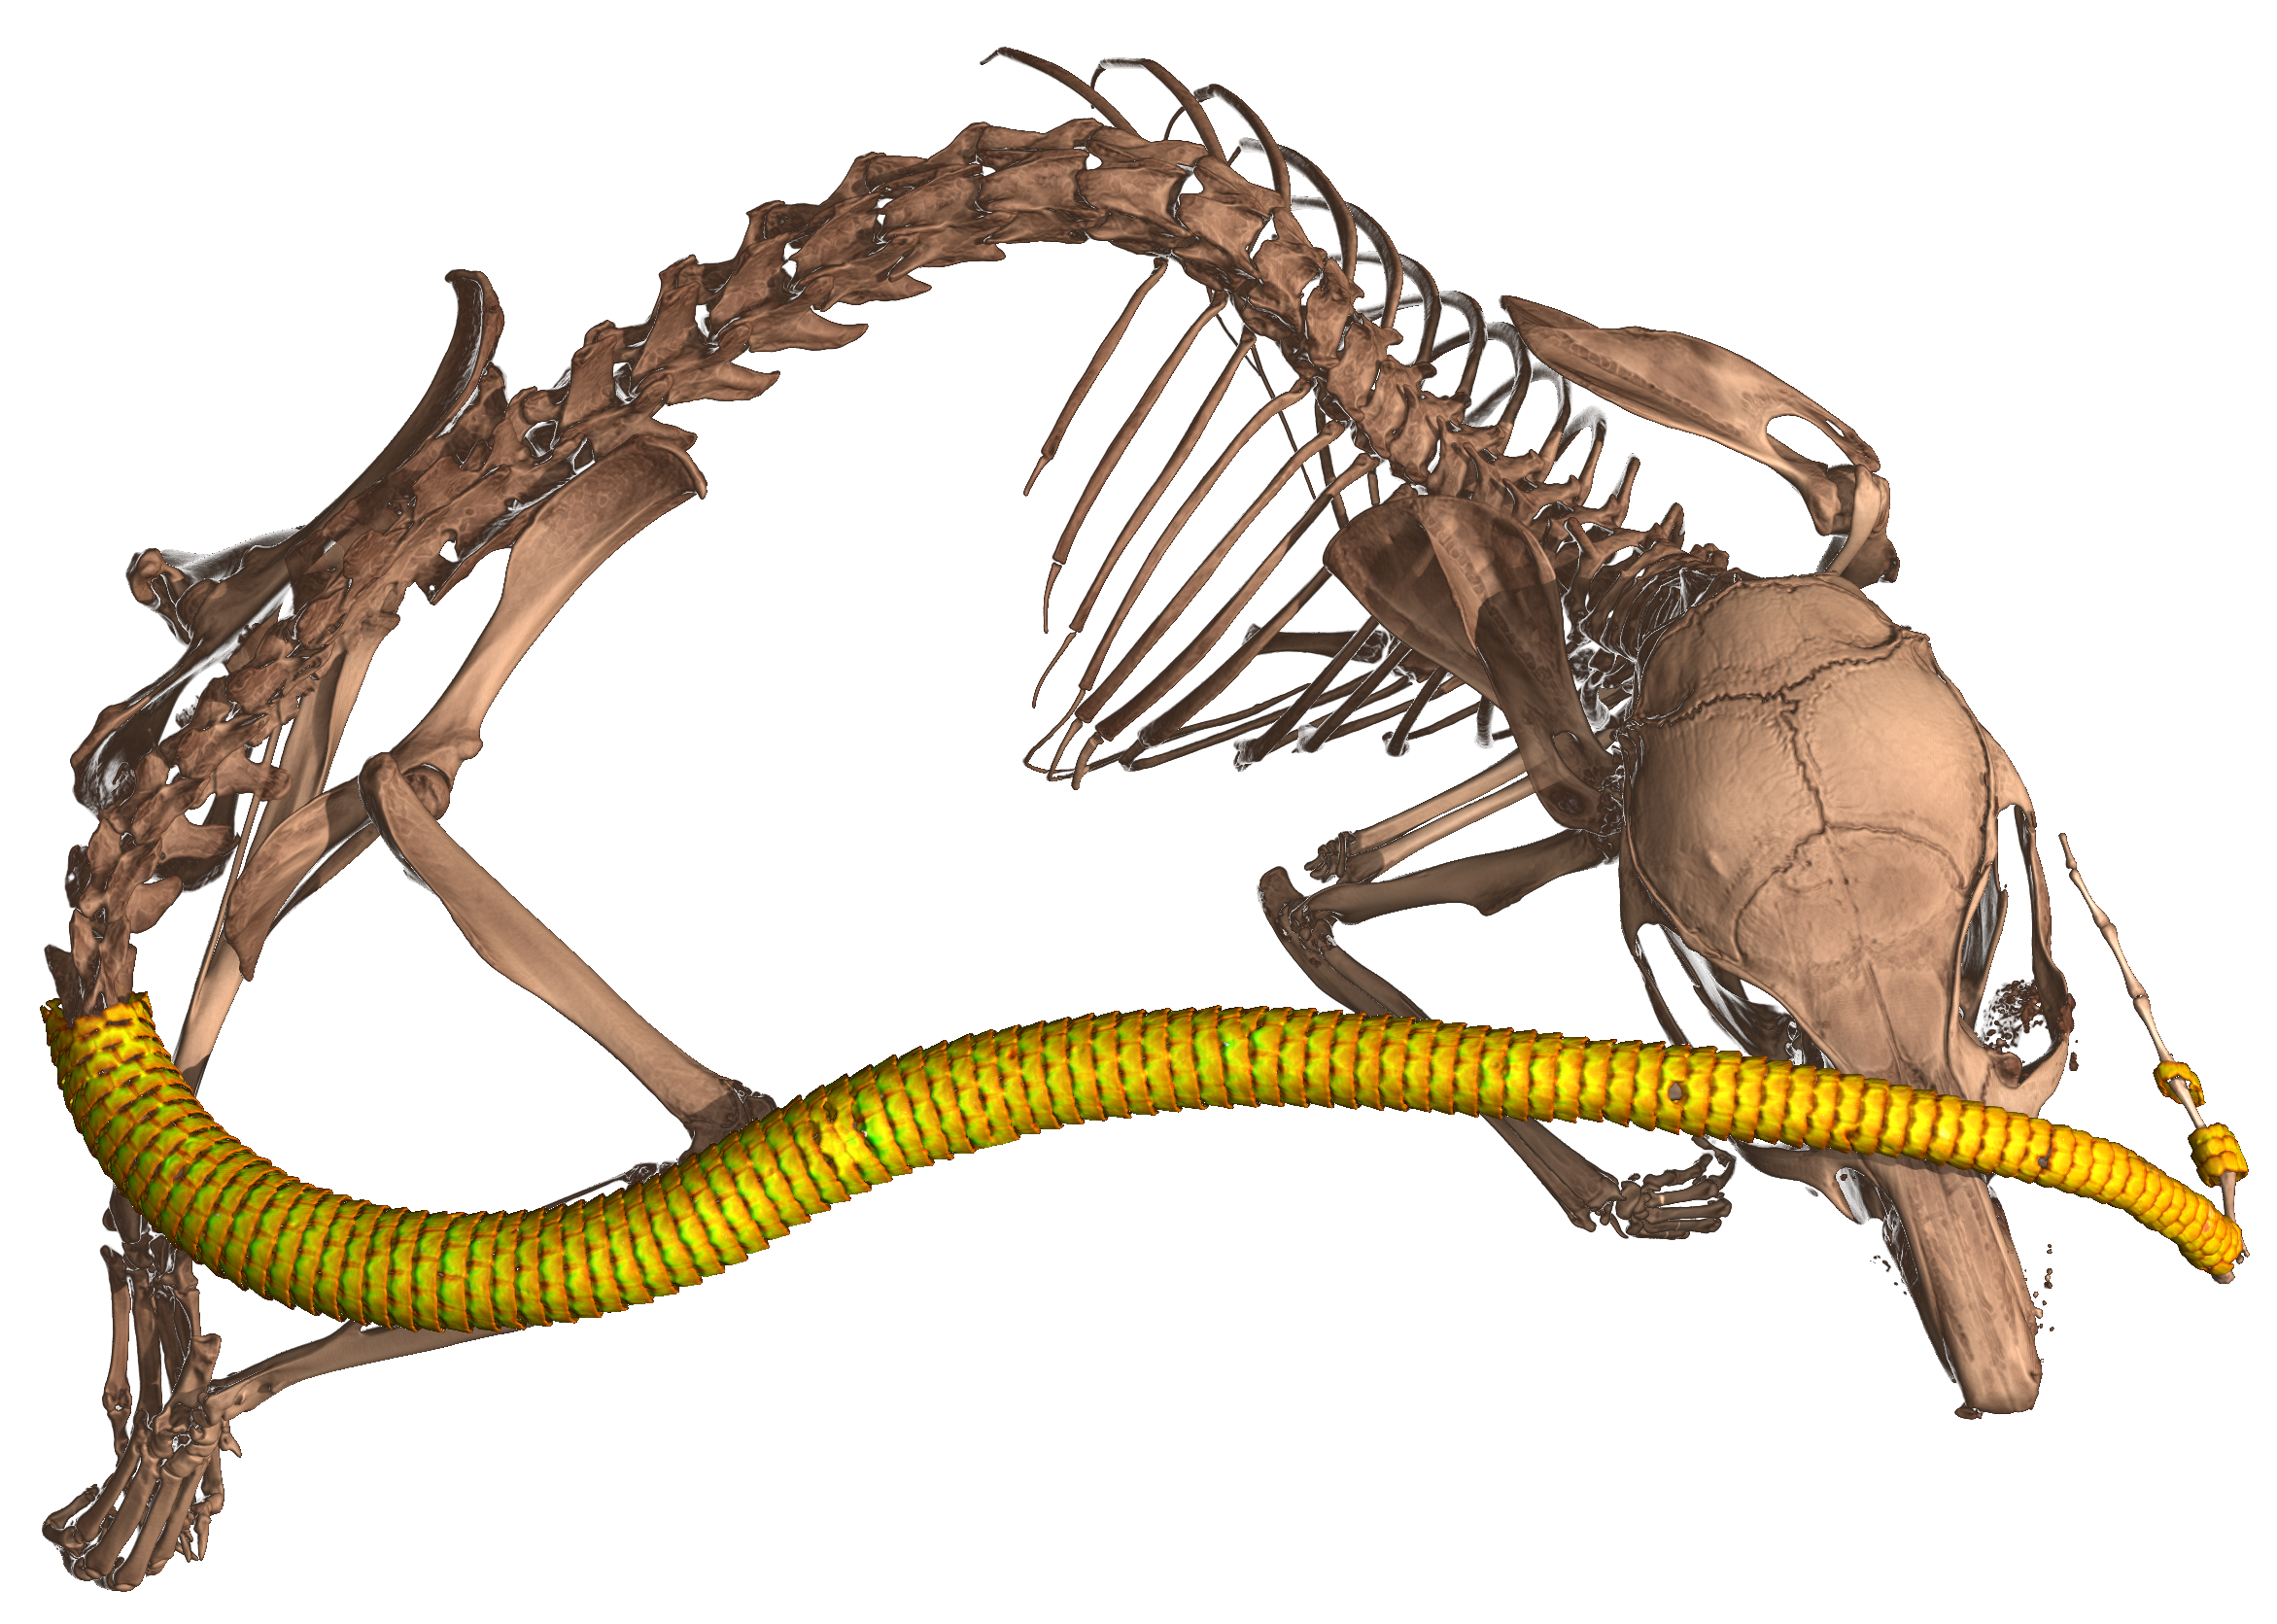 CT scan of a spiny mouse in the genus Acomys